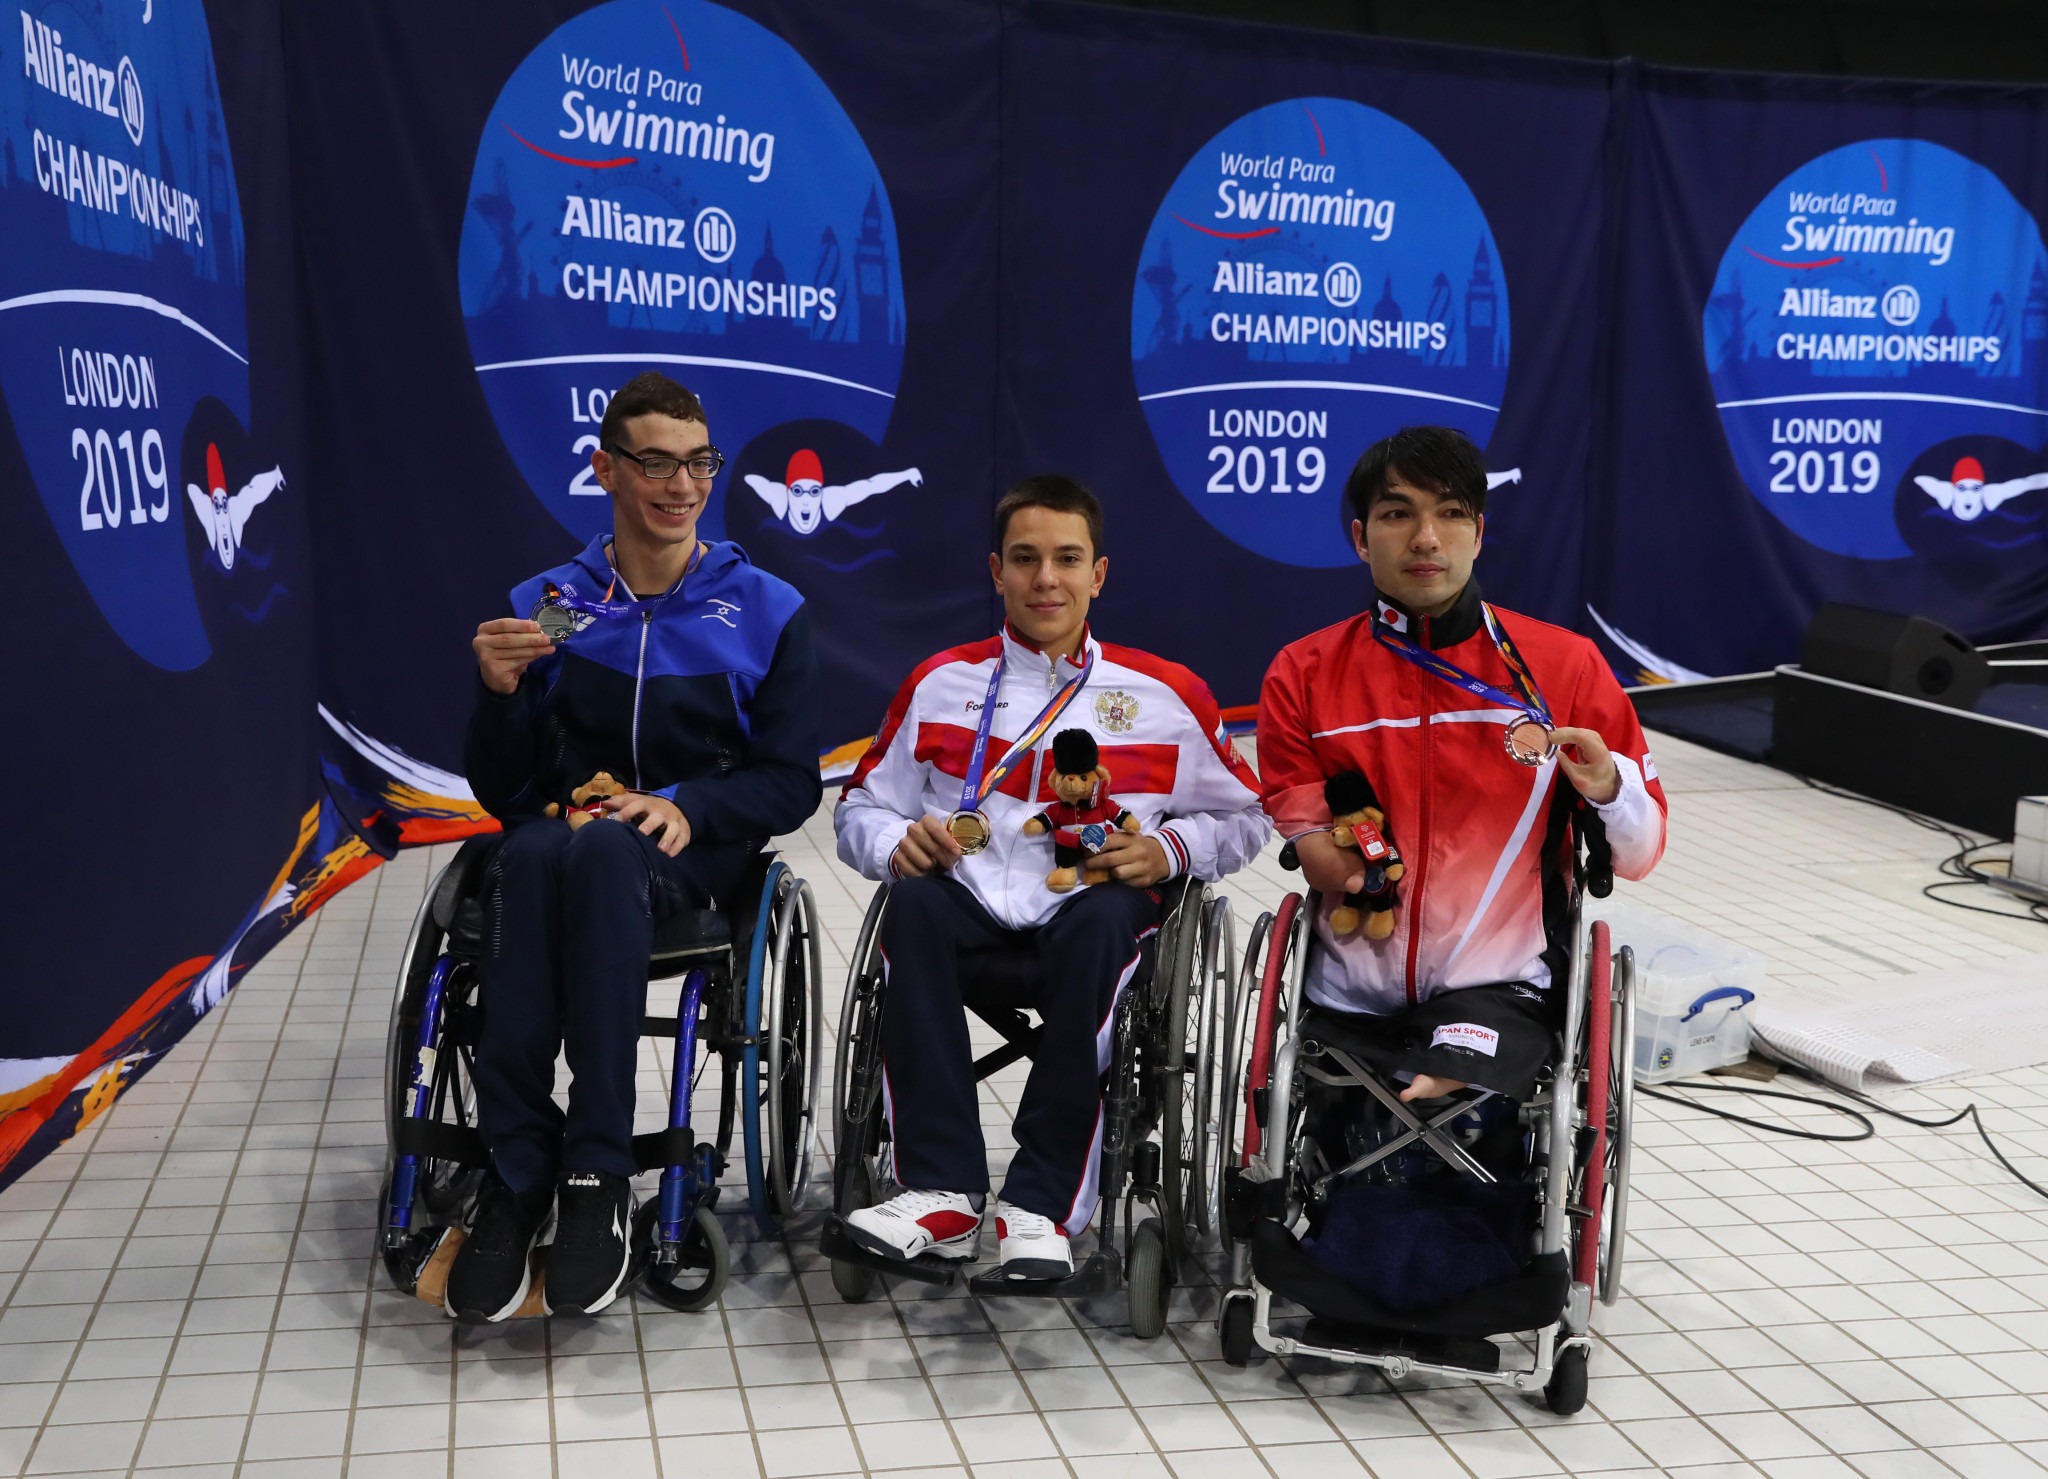 Ami Omer Dadaon, left, beat Roman Zhdanov, centre, and took the Russian's world record at the European Open Para Swimming Championships in Madeira ©Getty Images